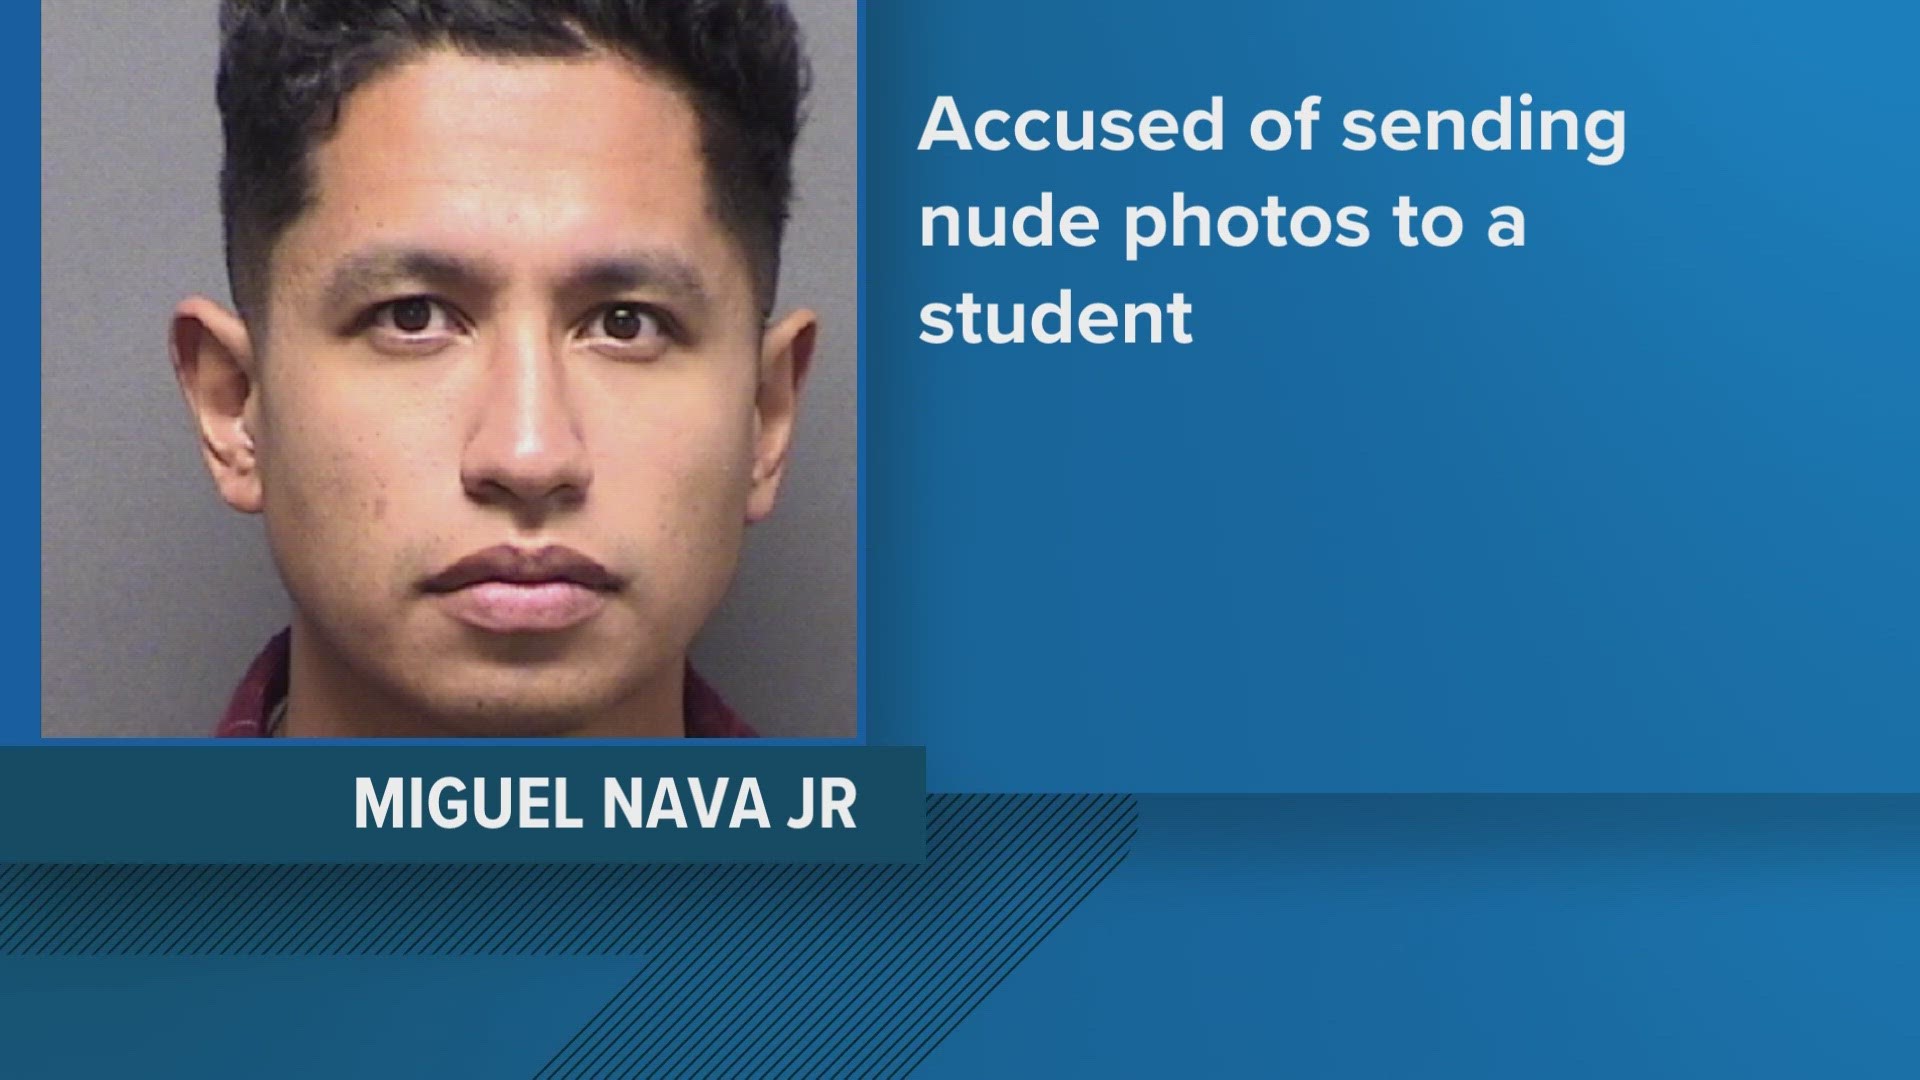 A student reported to a teacher after hearing about the nude photos and felt concerned for her well-being.